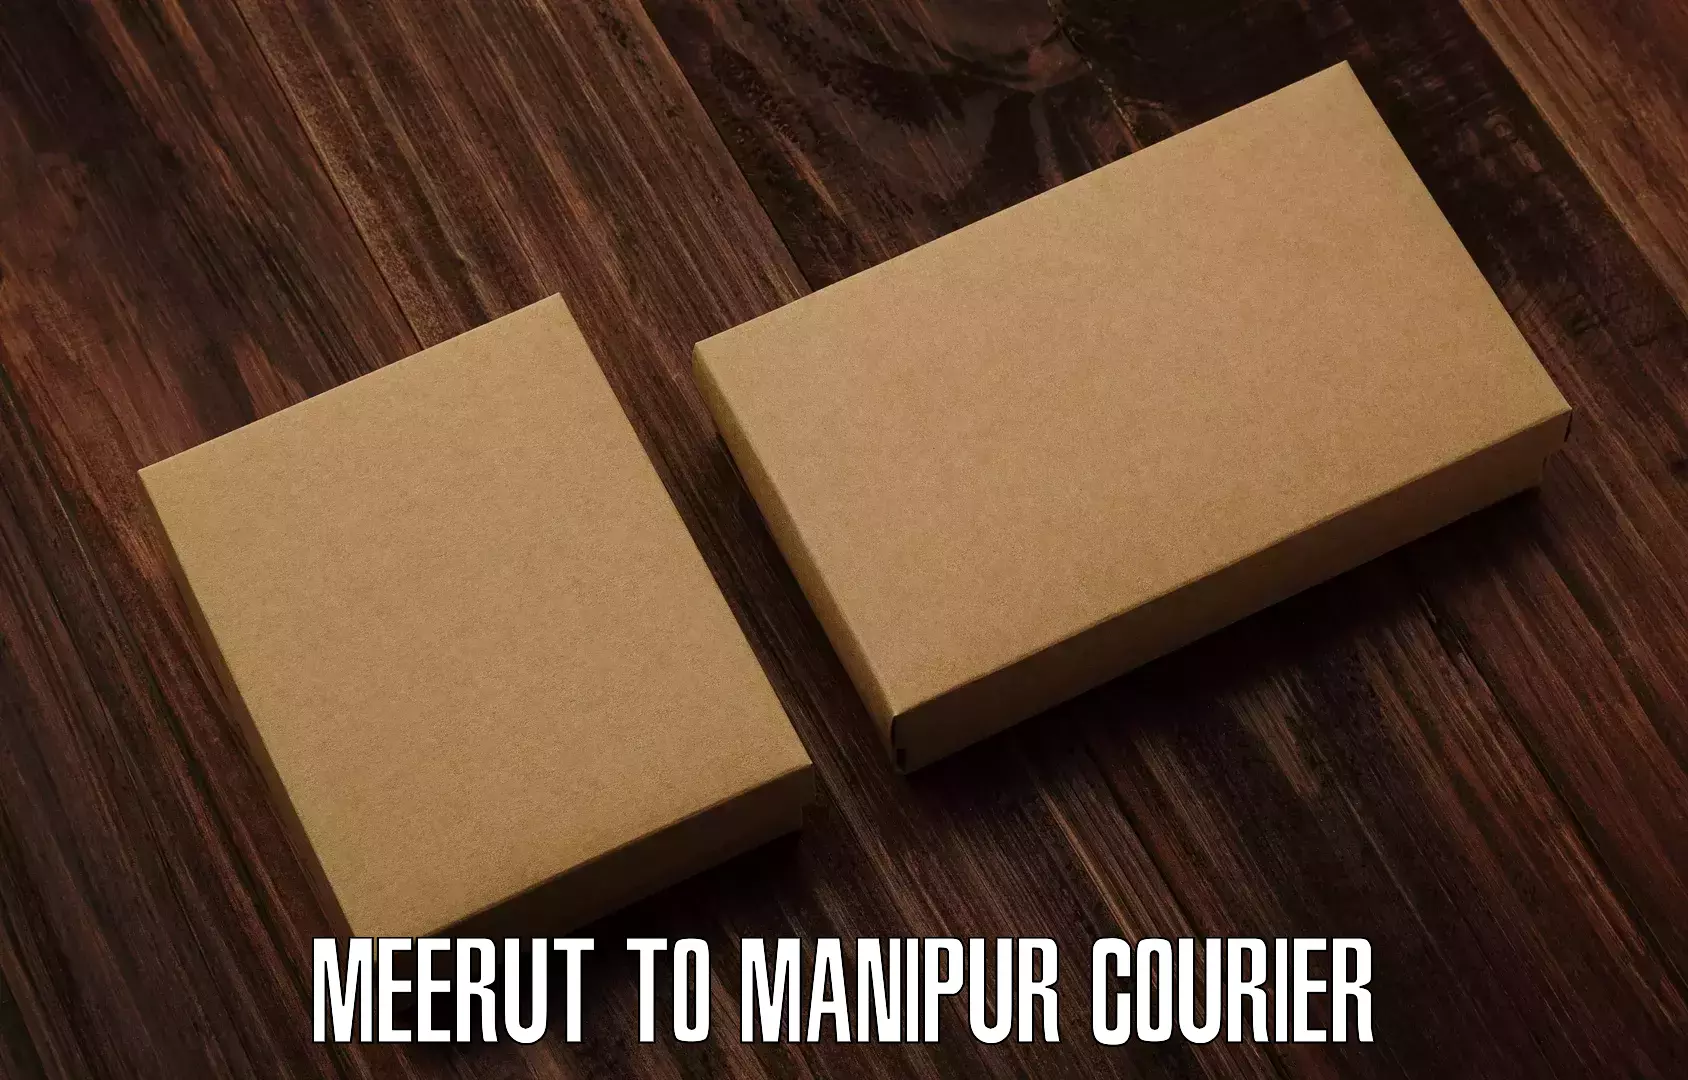 Nationwide courier service Meerut to Manipur